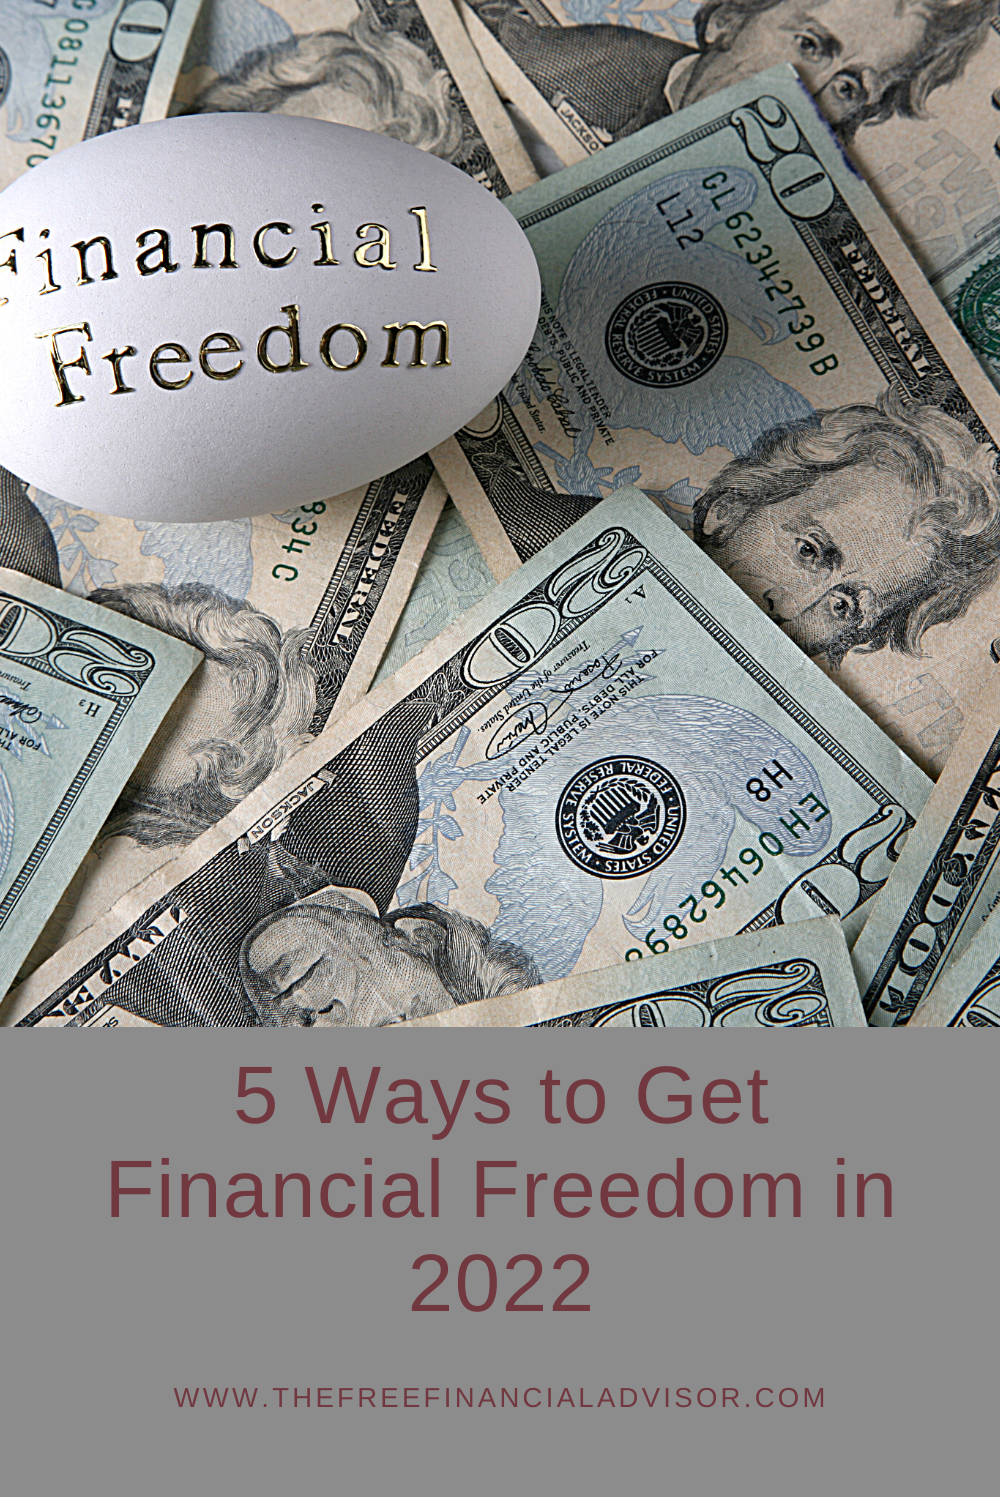 5 Ways to Get Financial Freedom in 2022